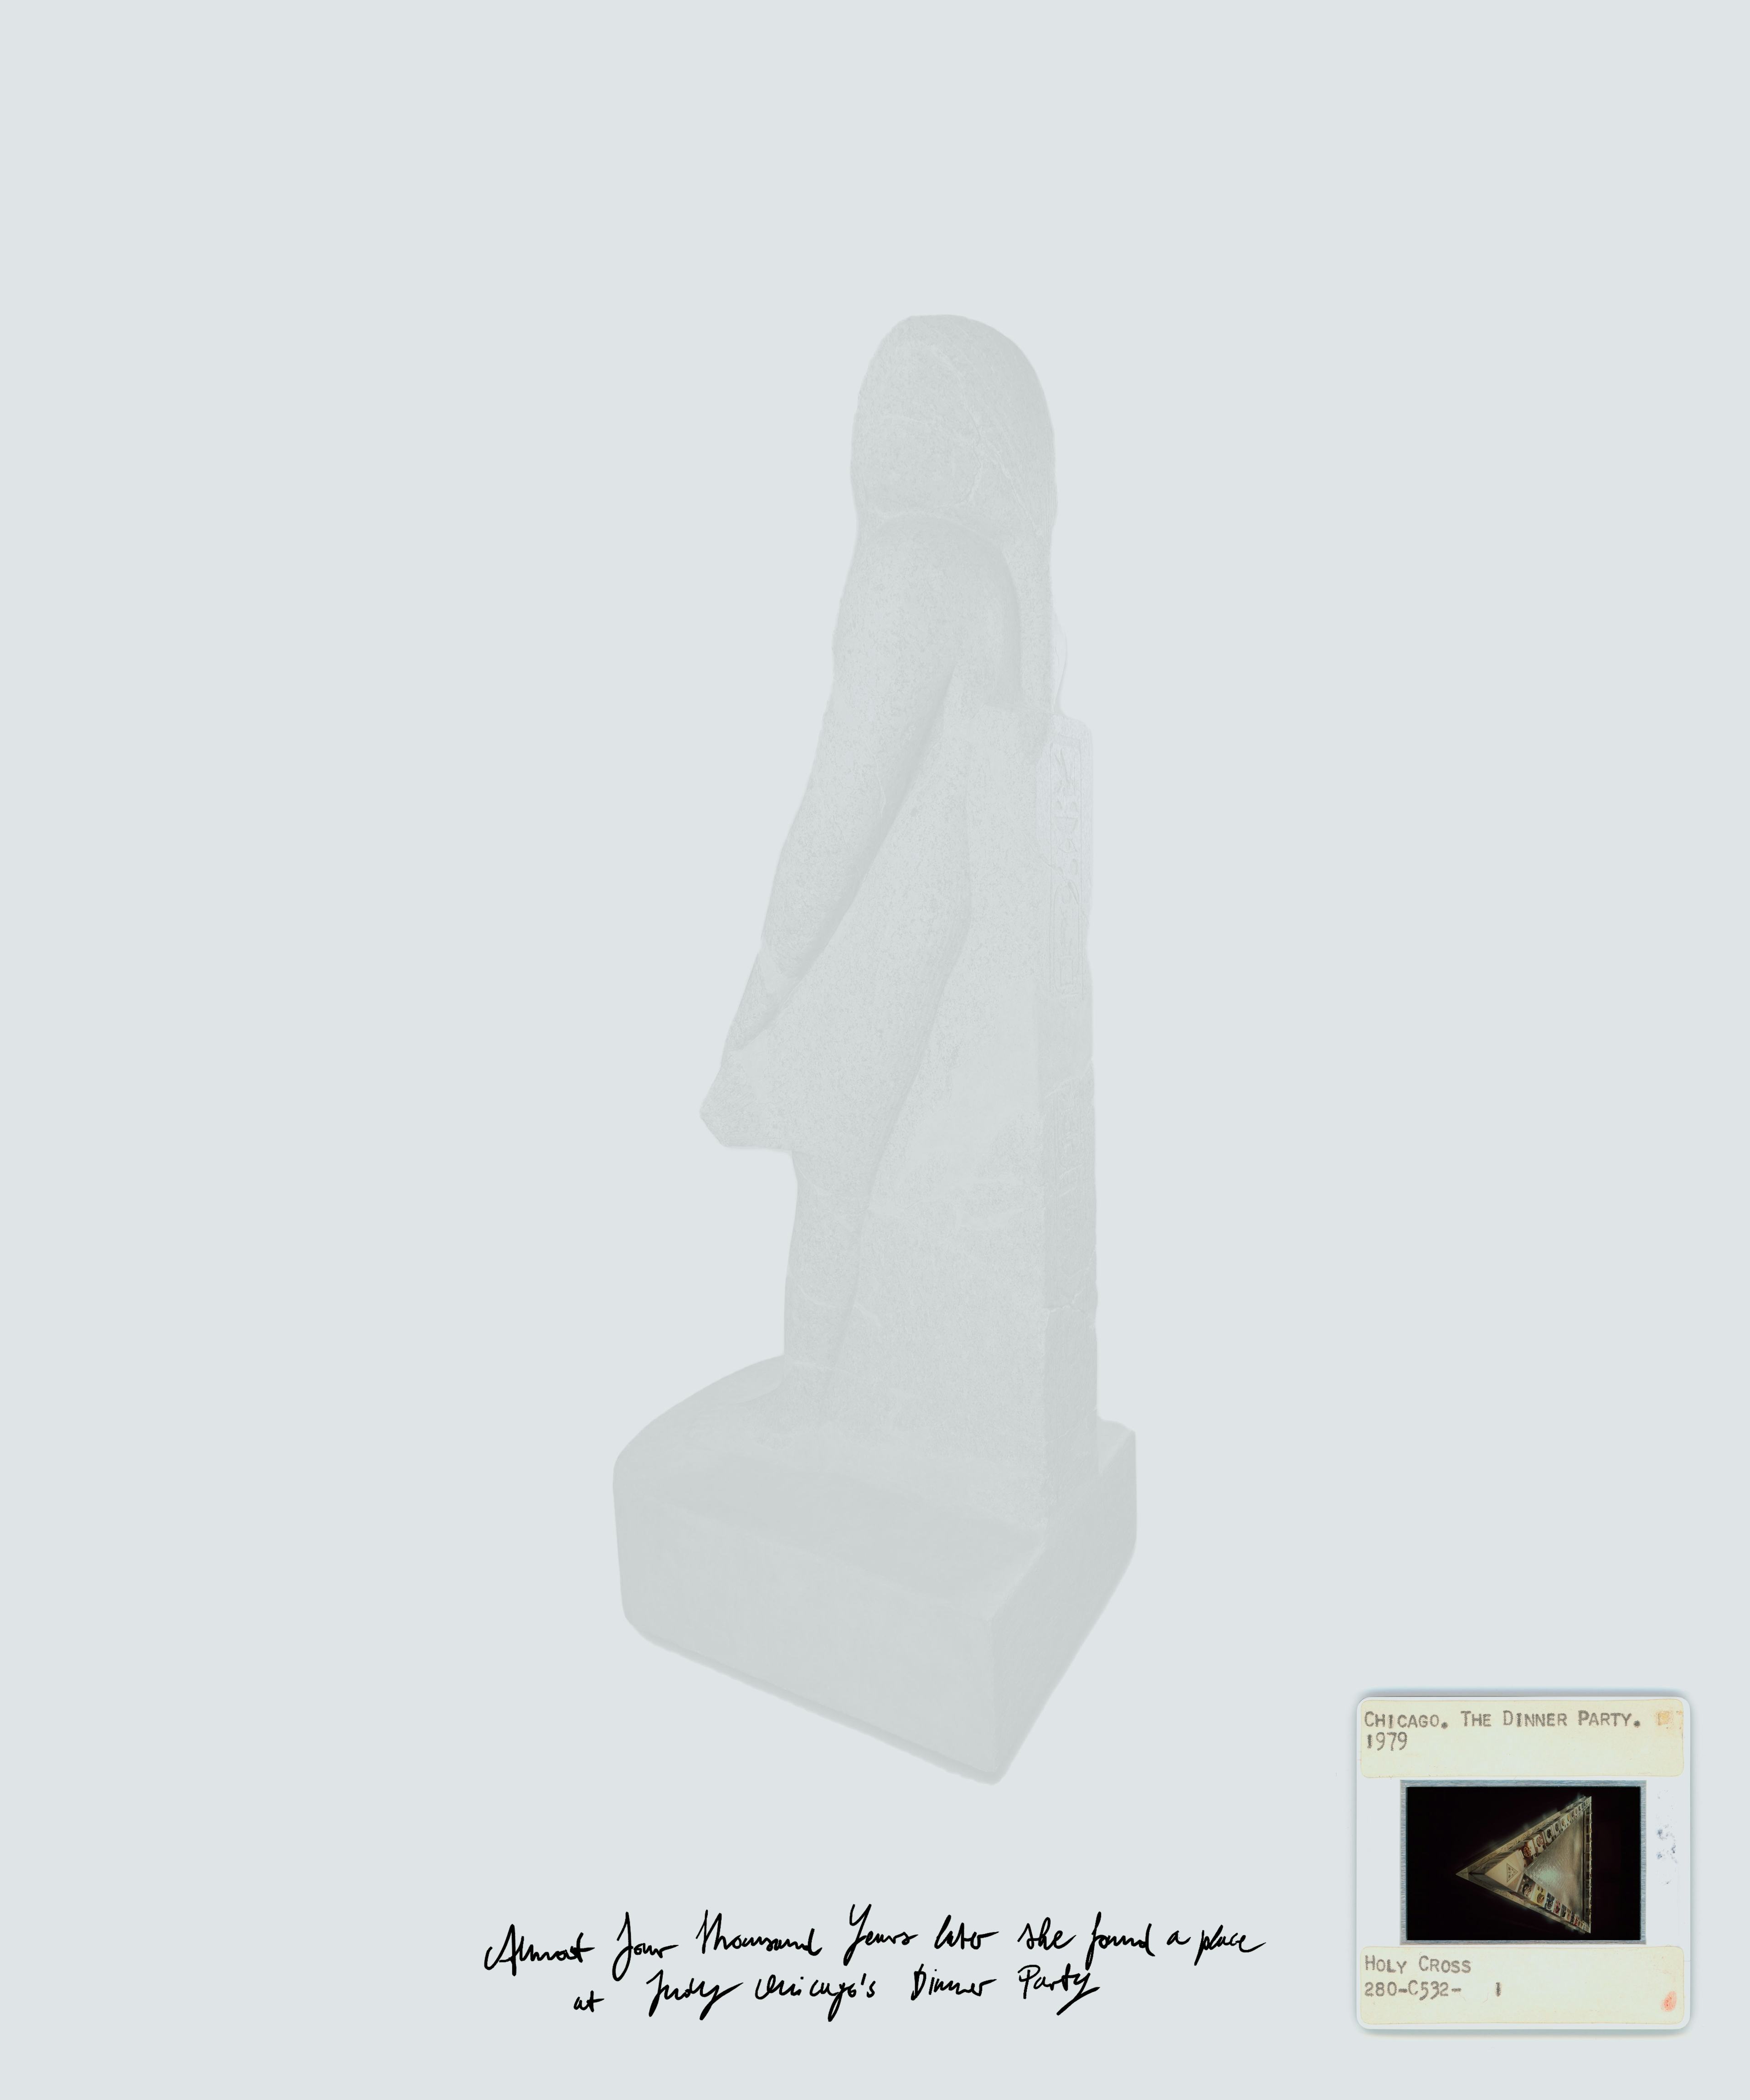 White image of a pharaoh figure, with writing and archival reference on the bottom